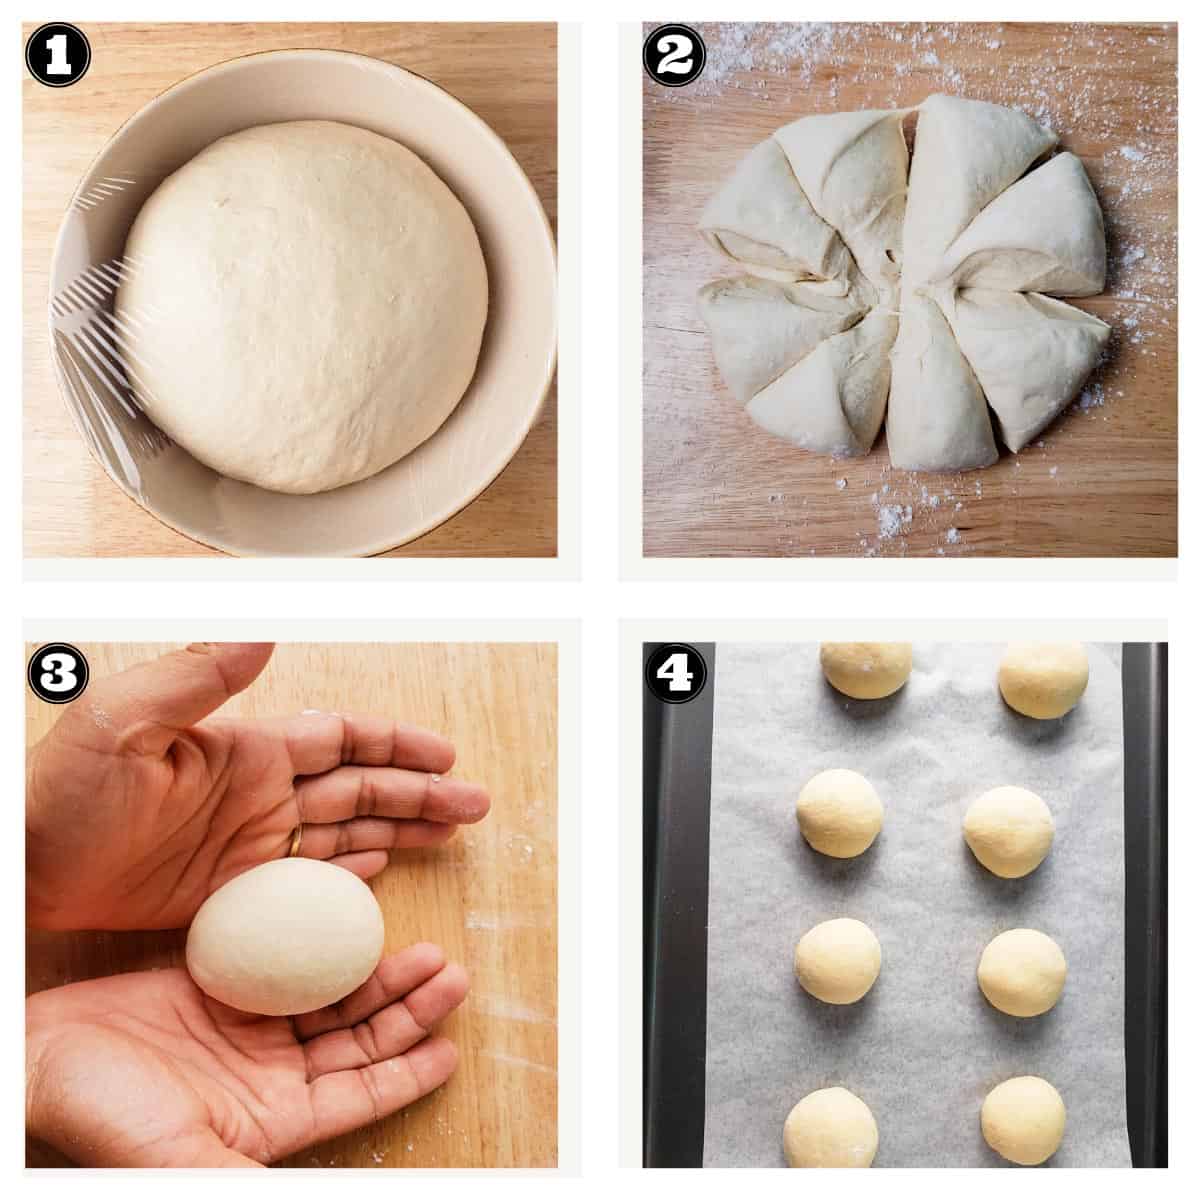 images showing shaping the buns